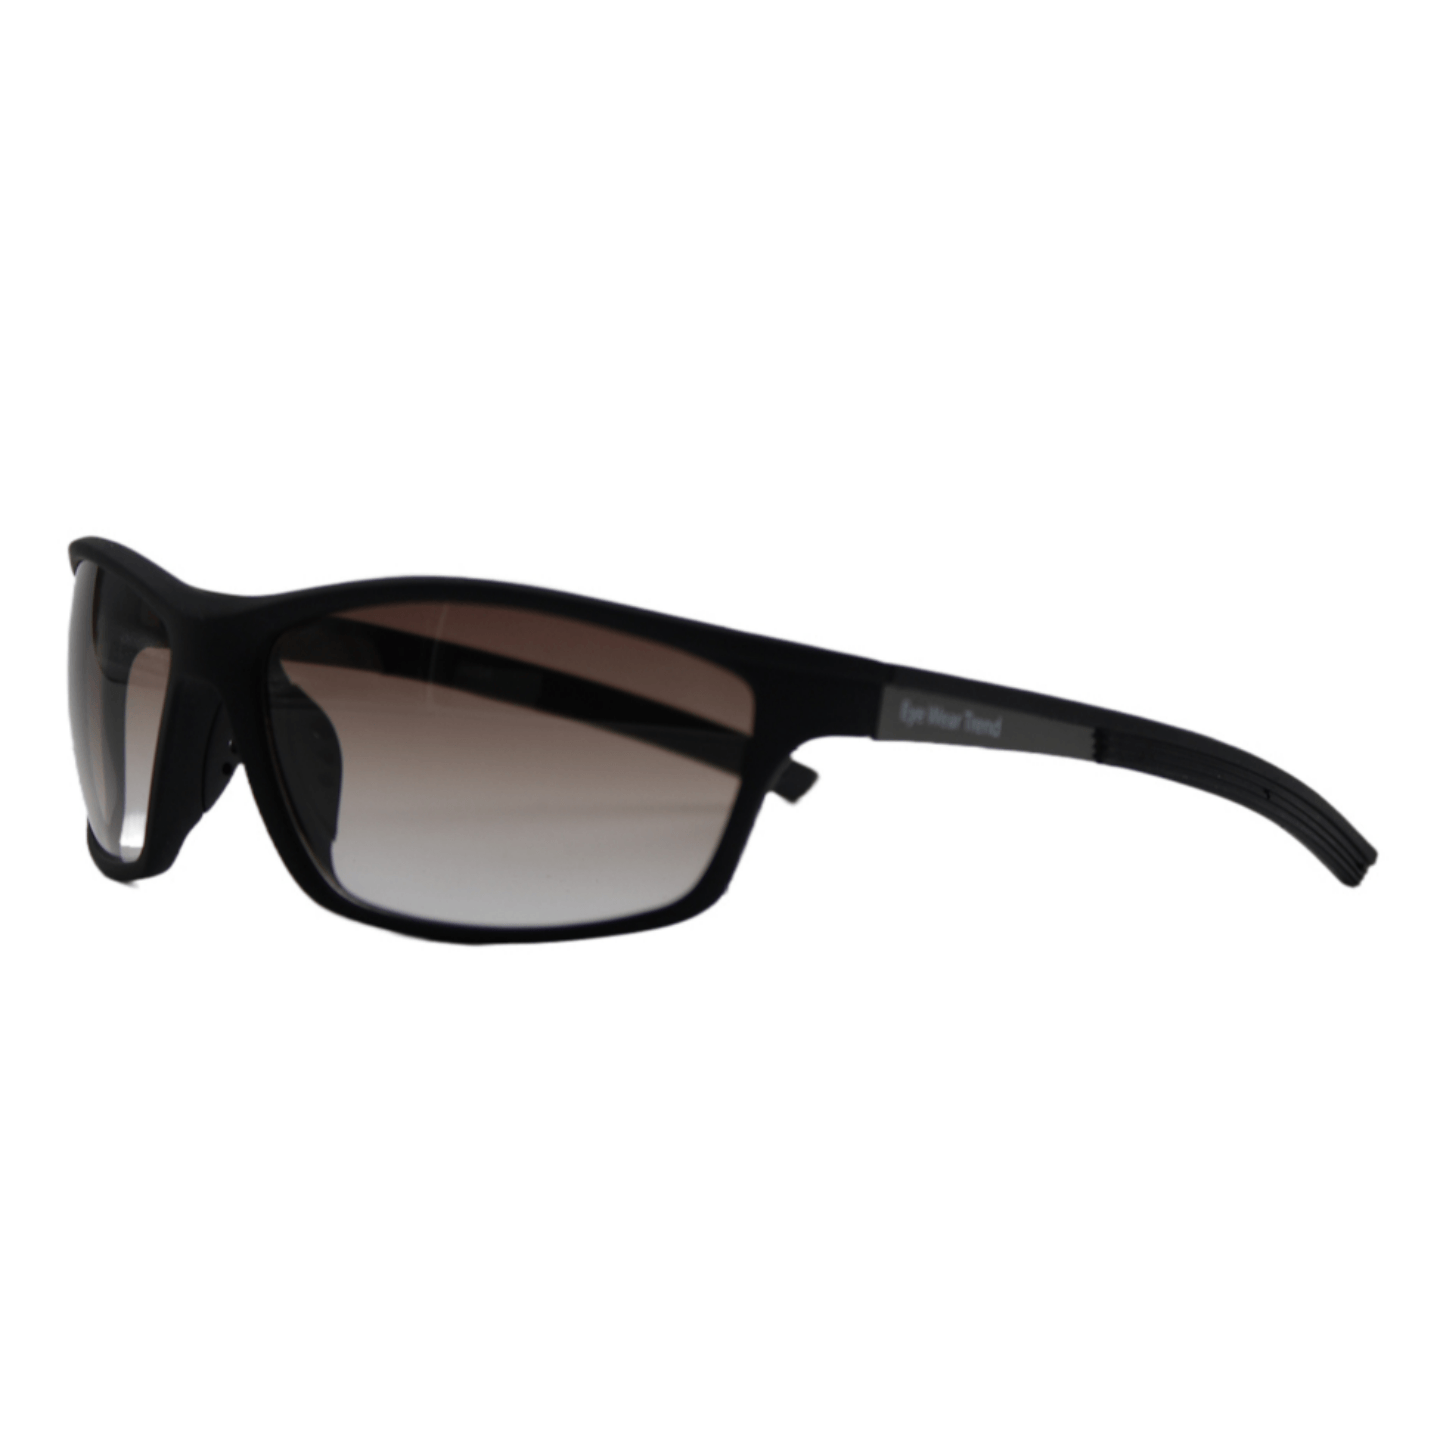 Brown Sports Sunglasses For Men and Women